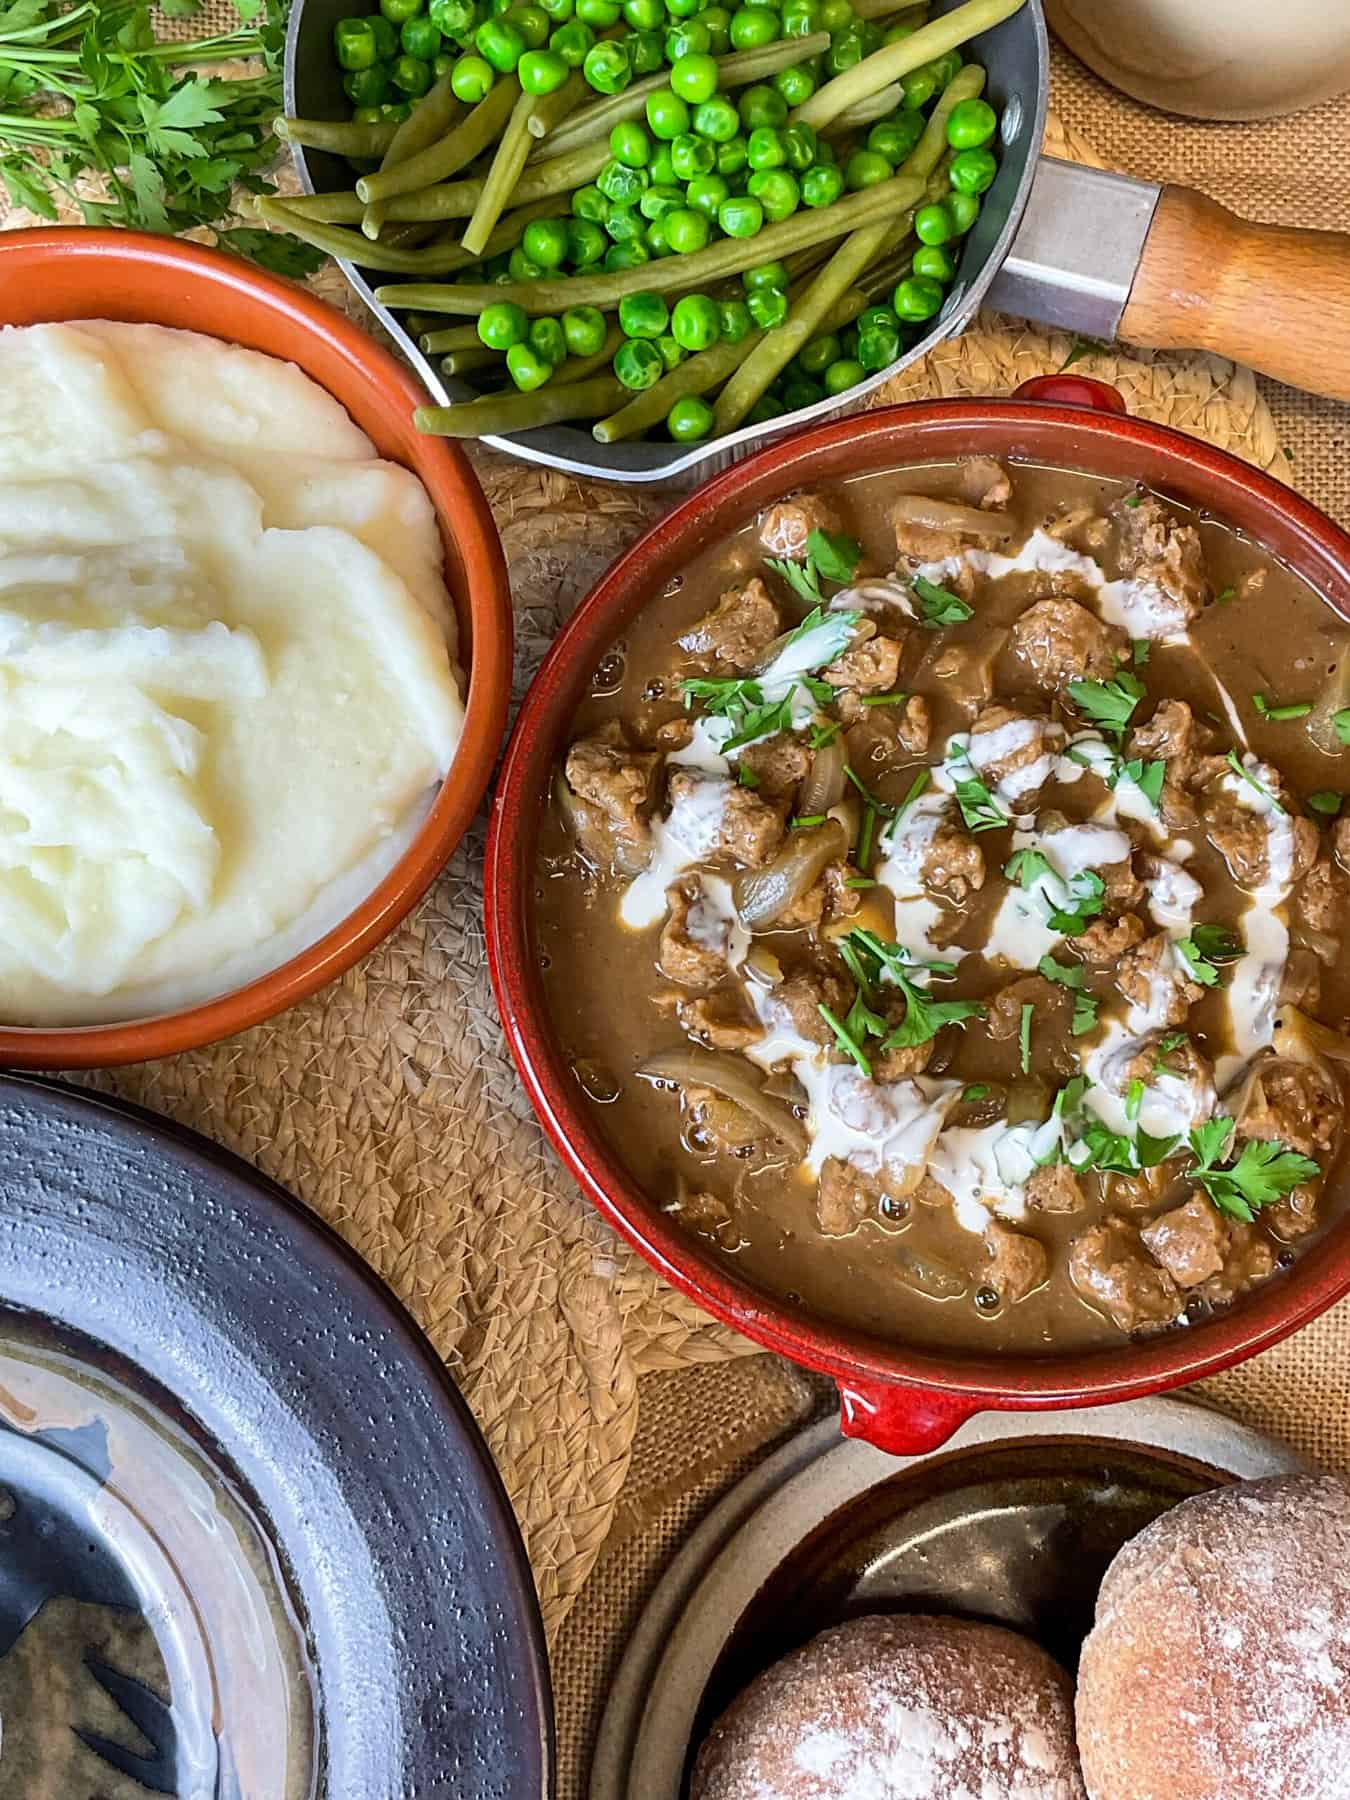 vegan stroganoff served with mashed potatoes, peas and green beans on dinner table.